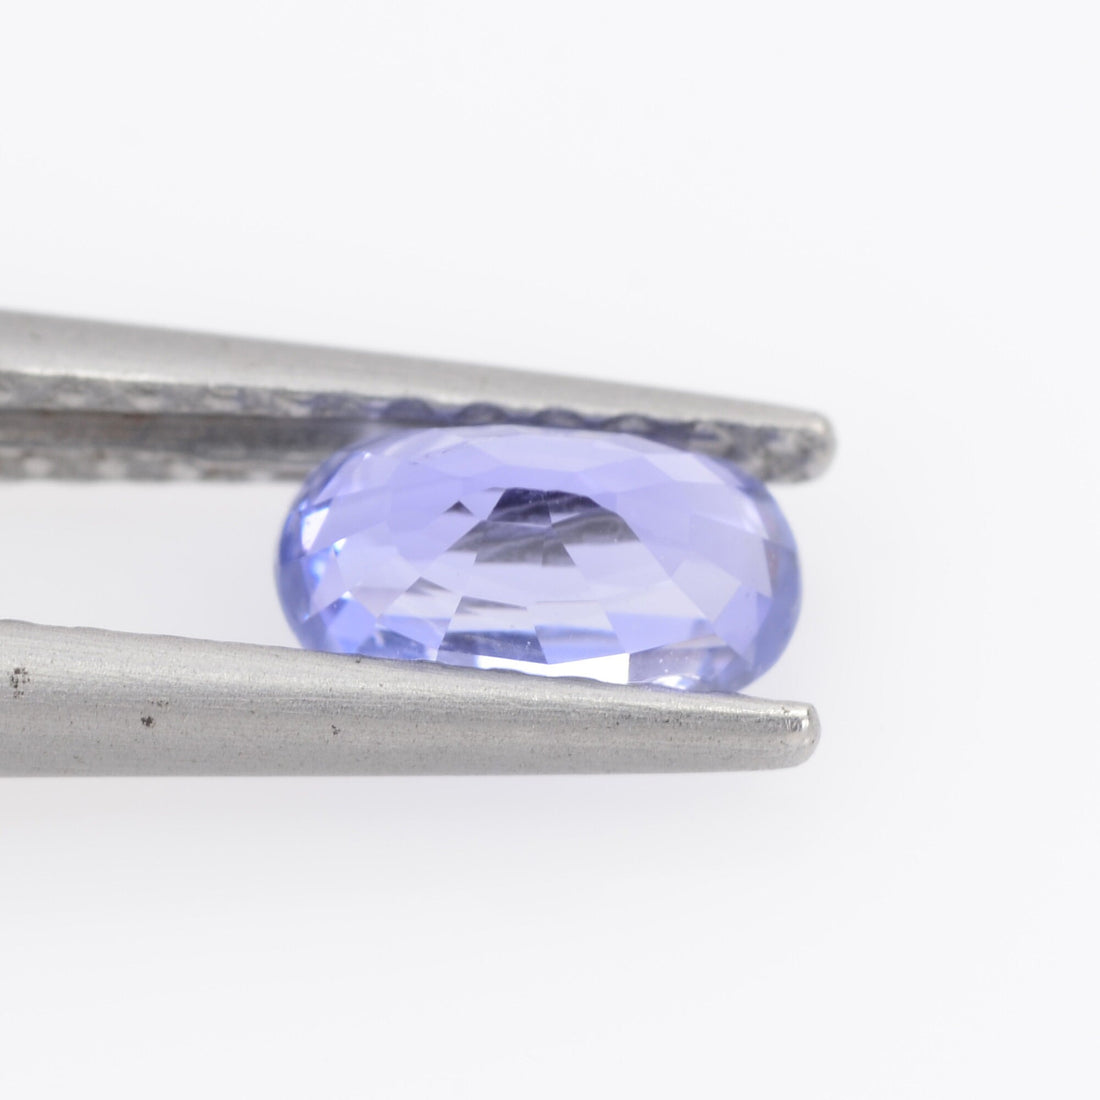 0.66 cts Natural Purple Sapphire Loose Gemstone Oval Cut